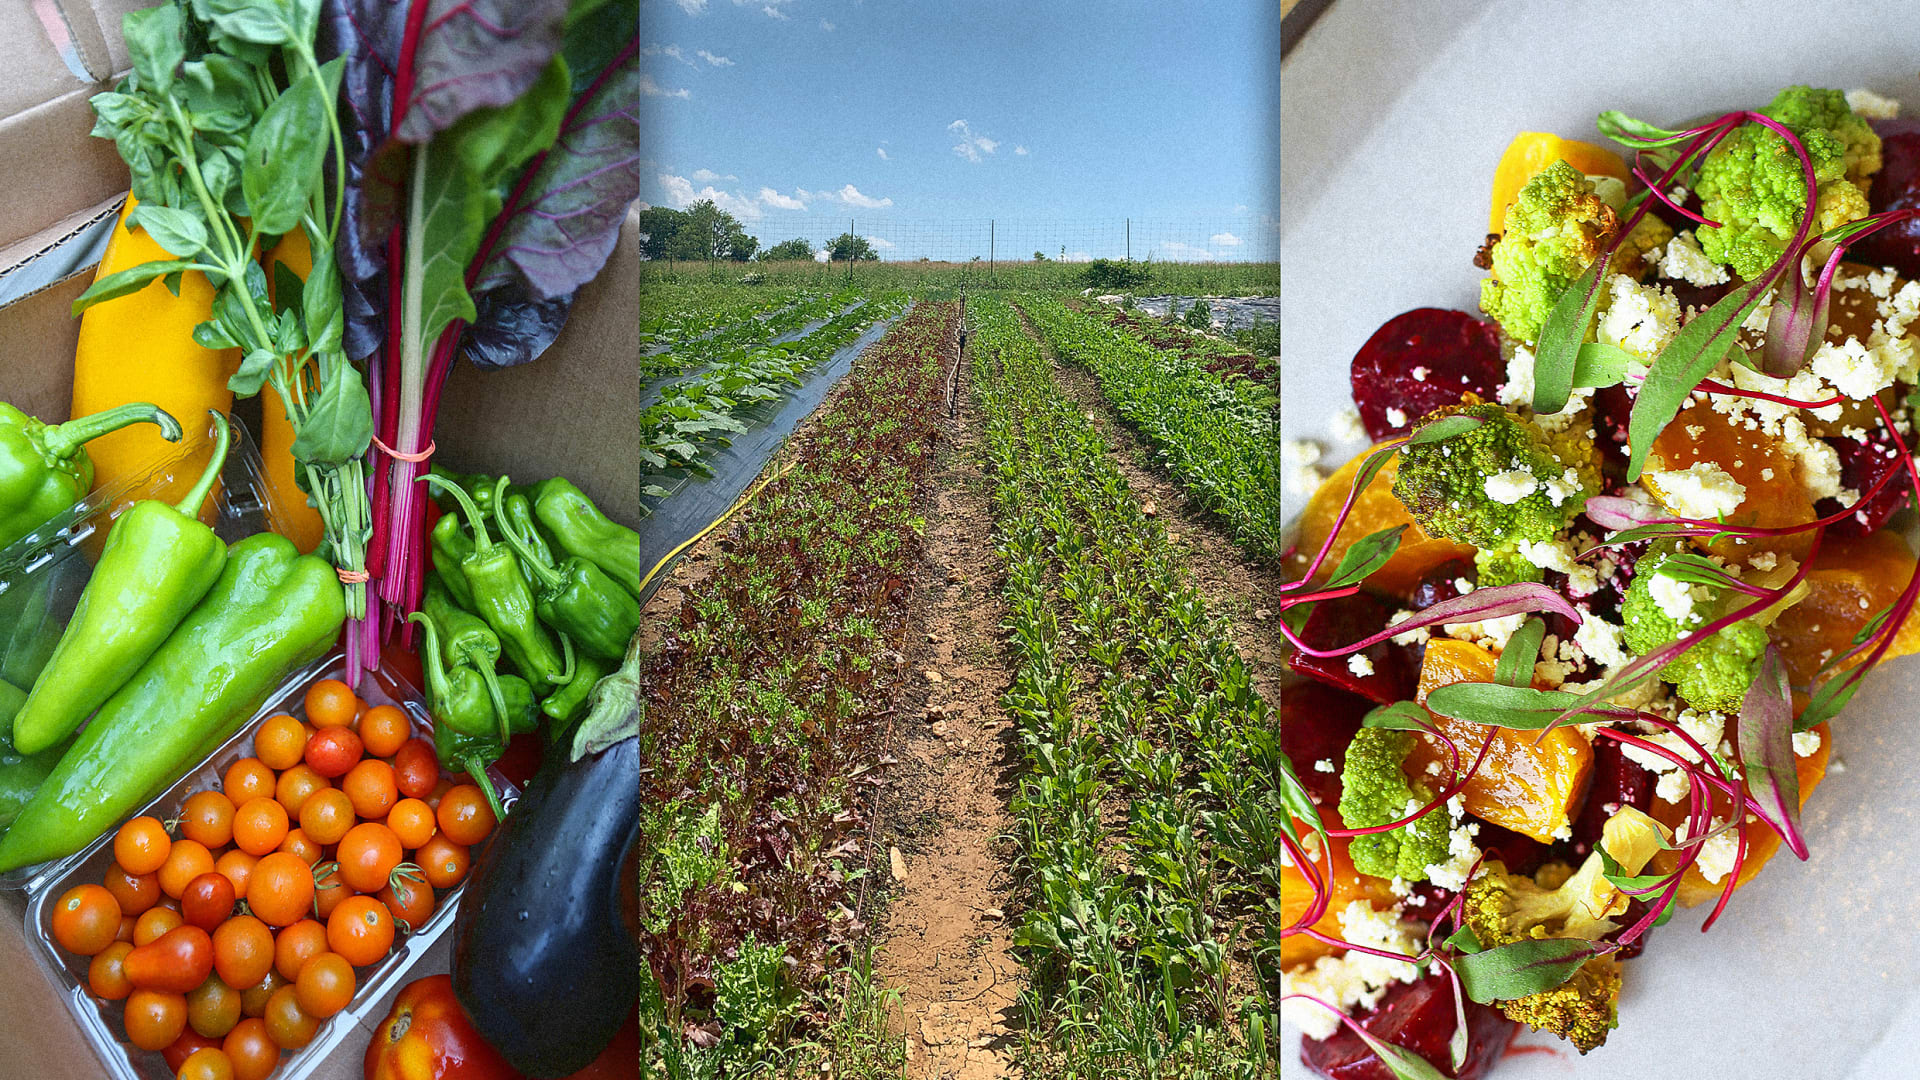 This restaurant group grows 50,000 pounds of seasonal produce on its own regenerative farm